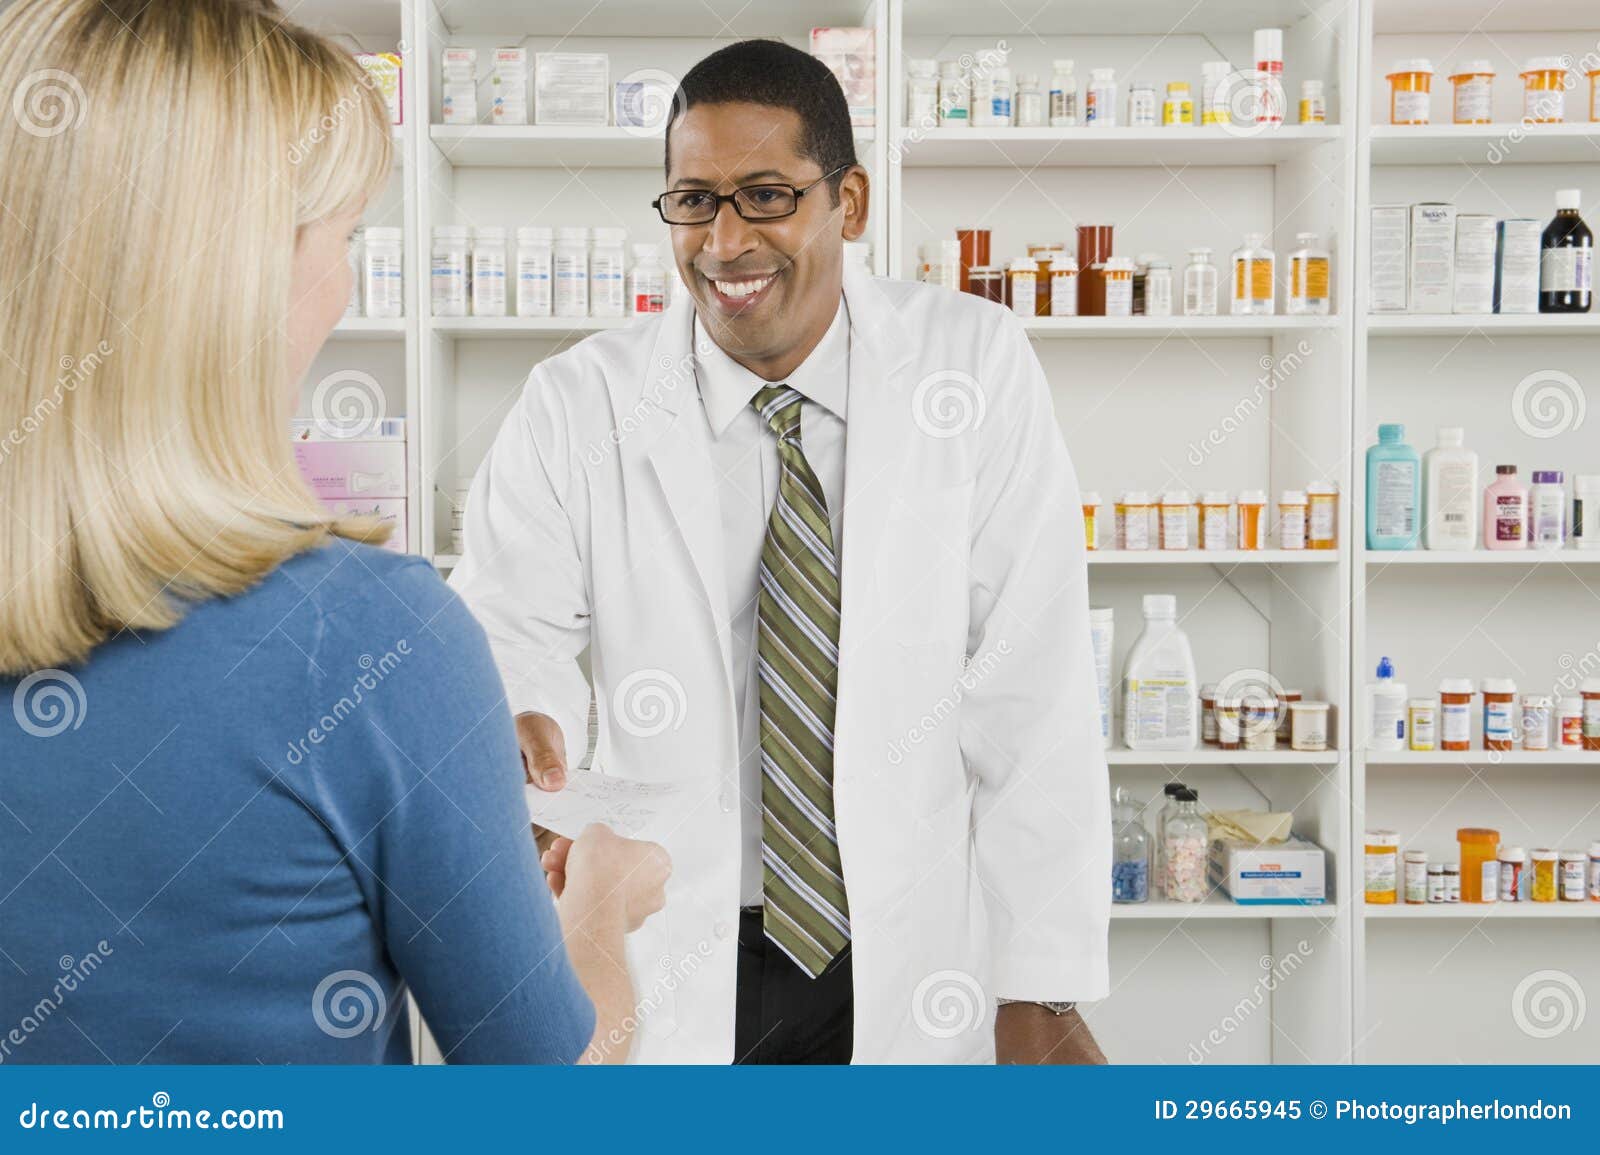 woman picking up prescription drugs at pharmacy